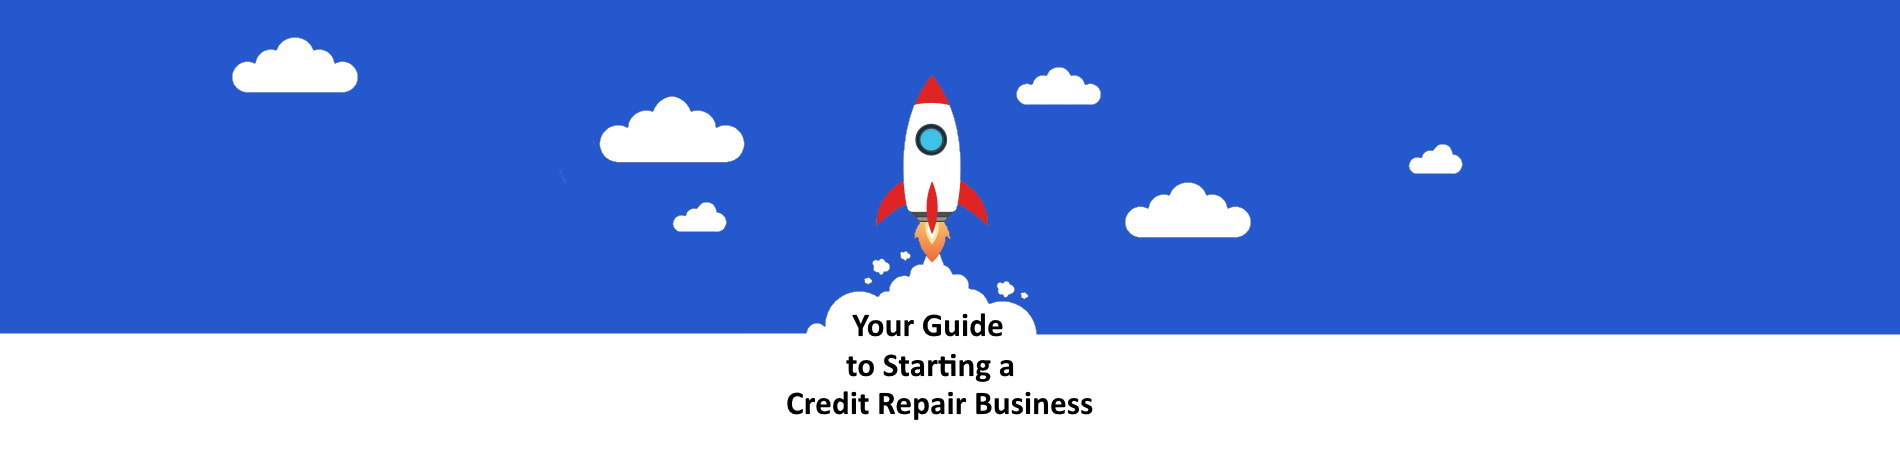 Your guide to starting a credit repair business